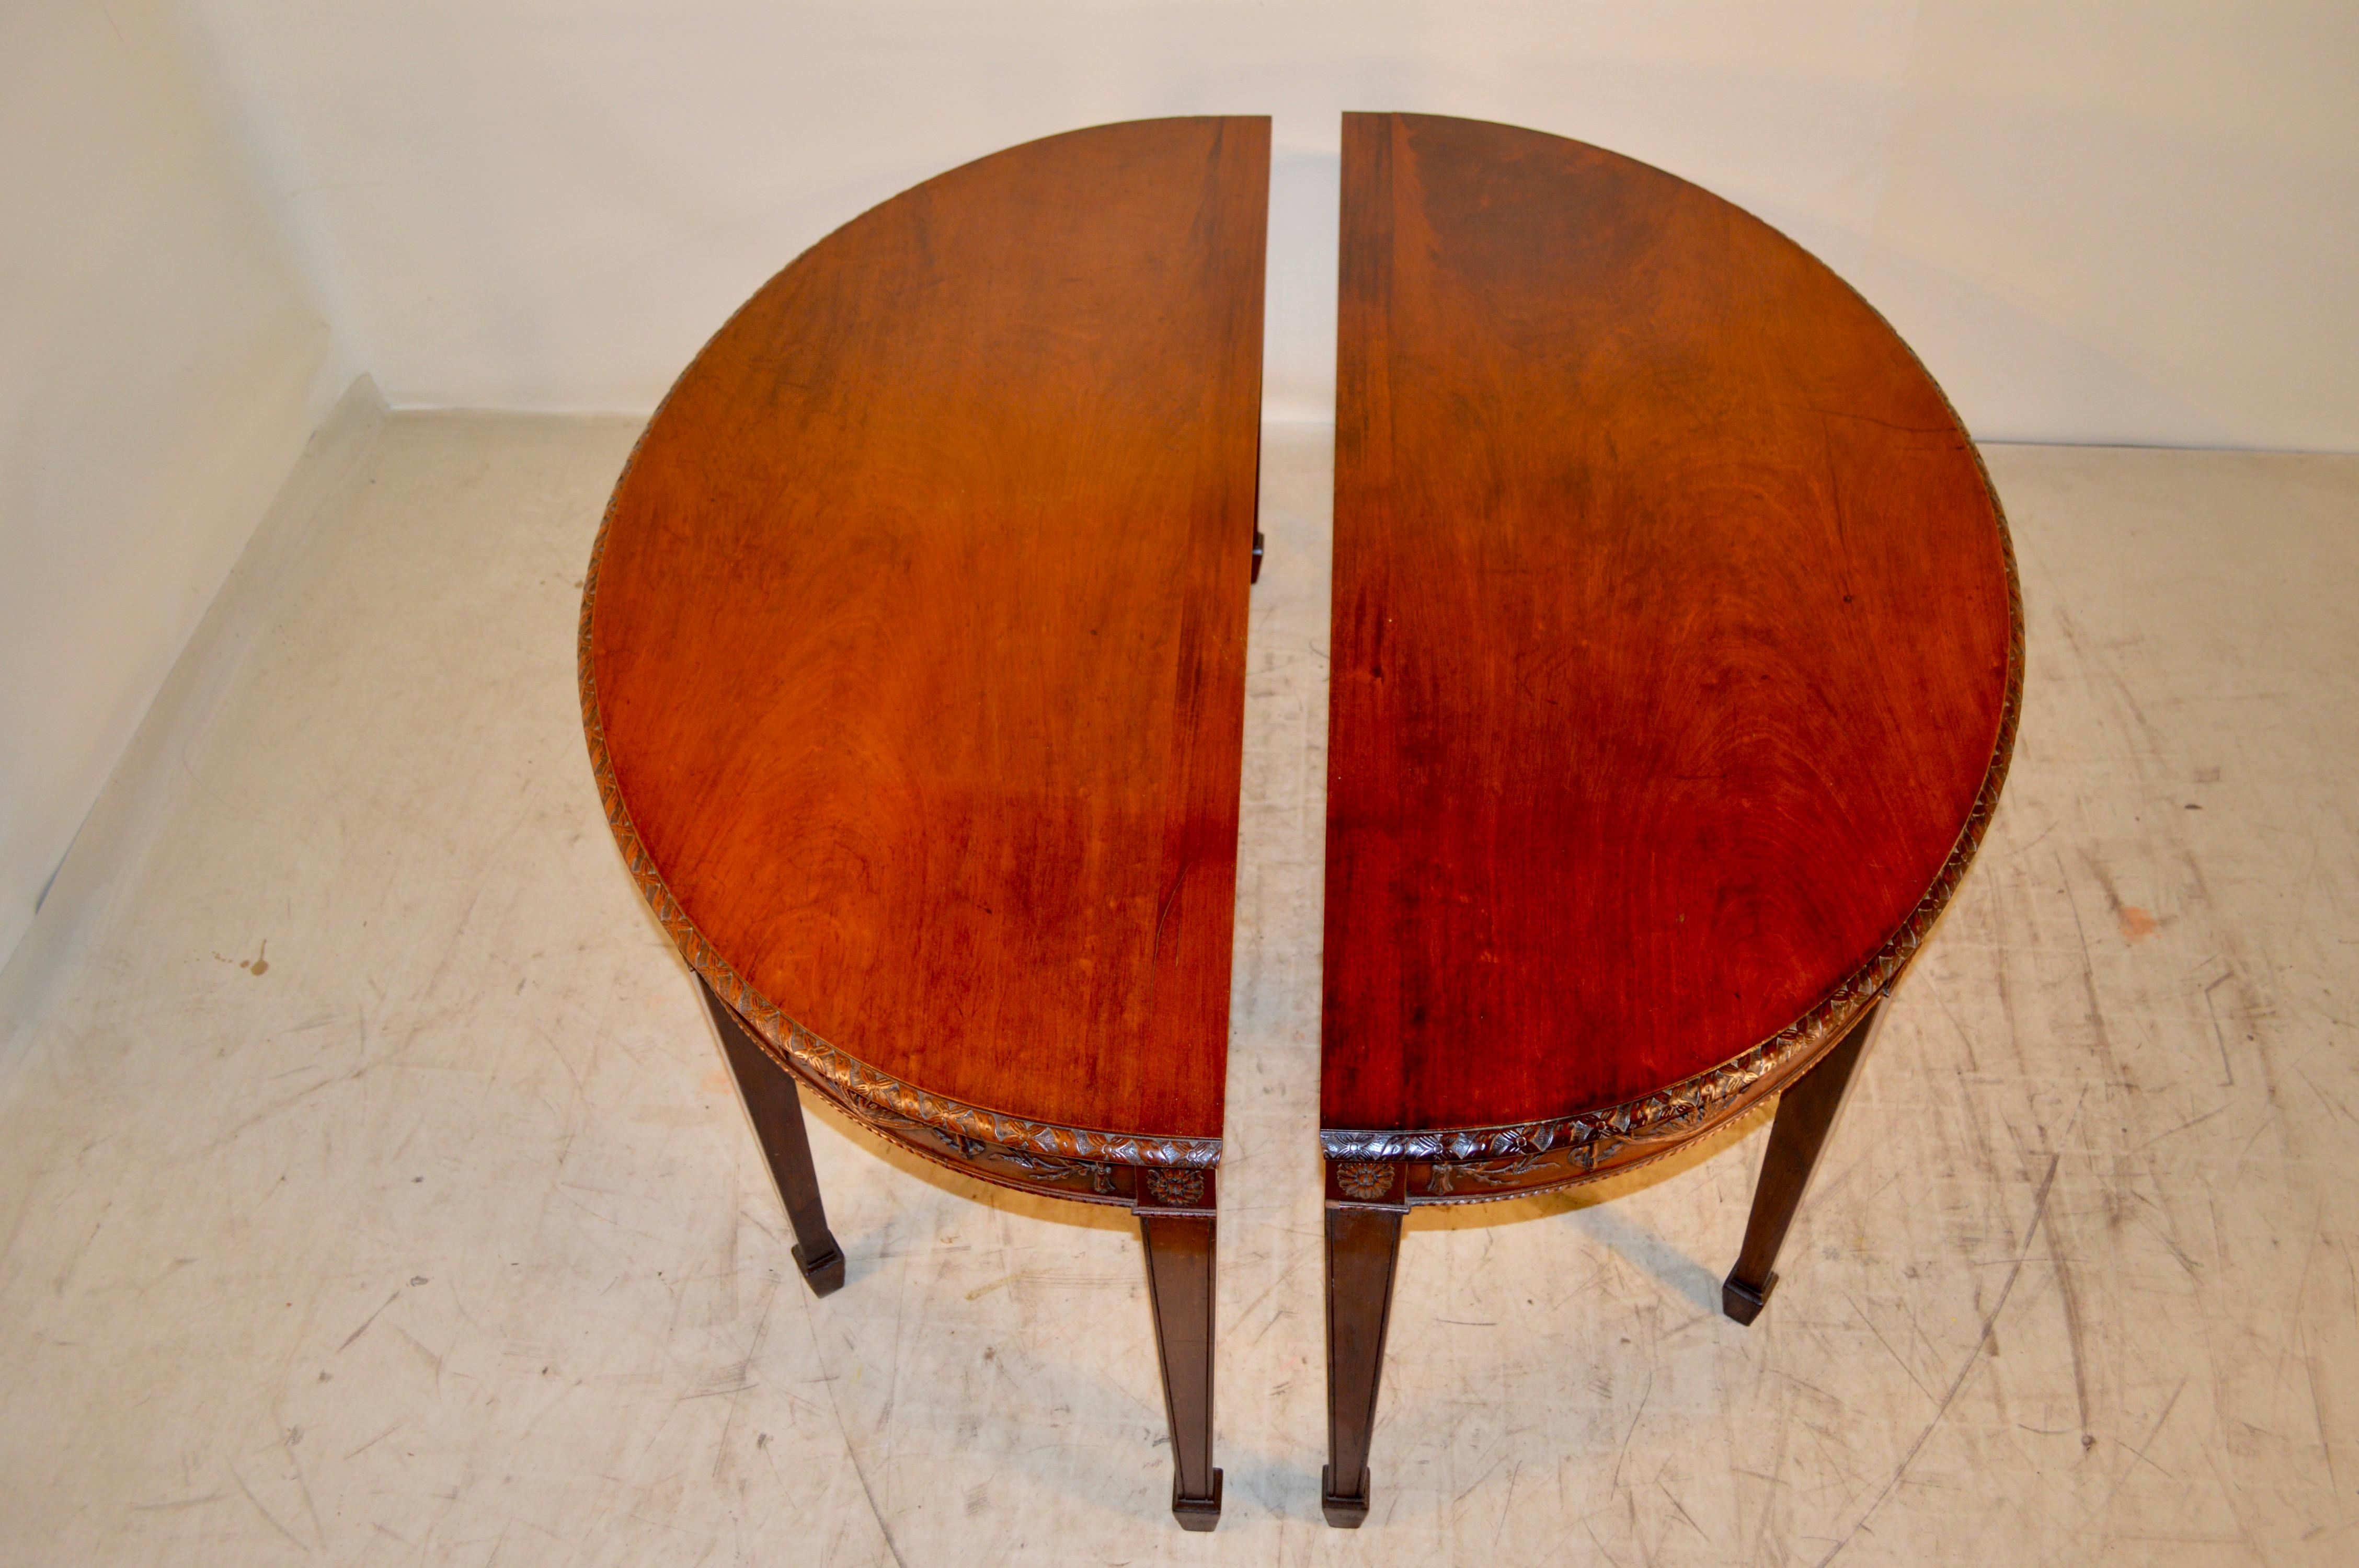 English Pair of Early 19th Century Demilune Tables For Sale